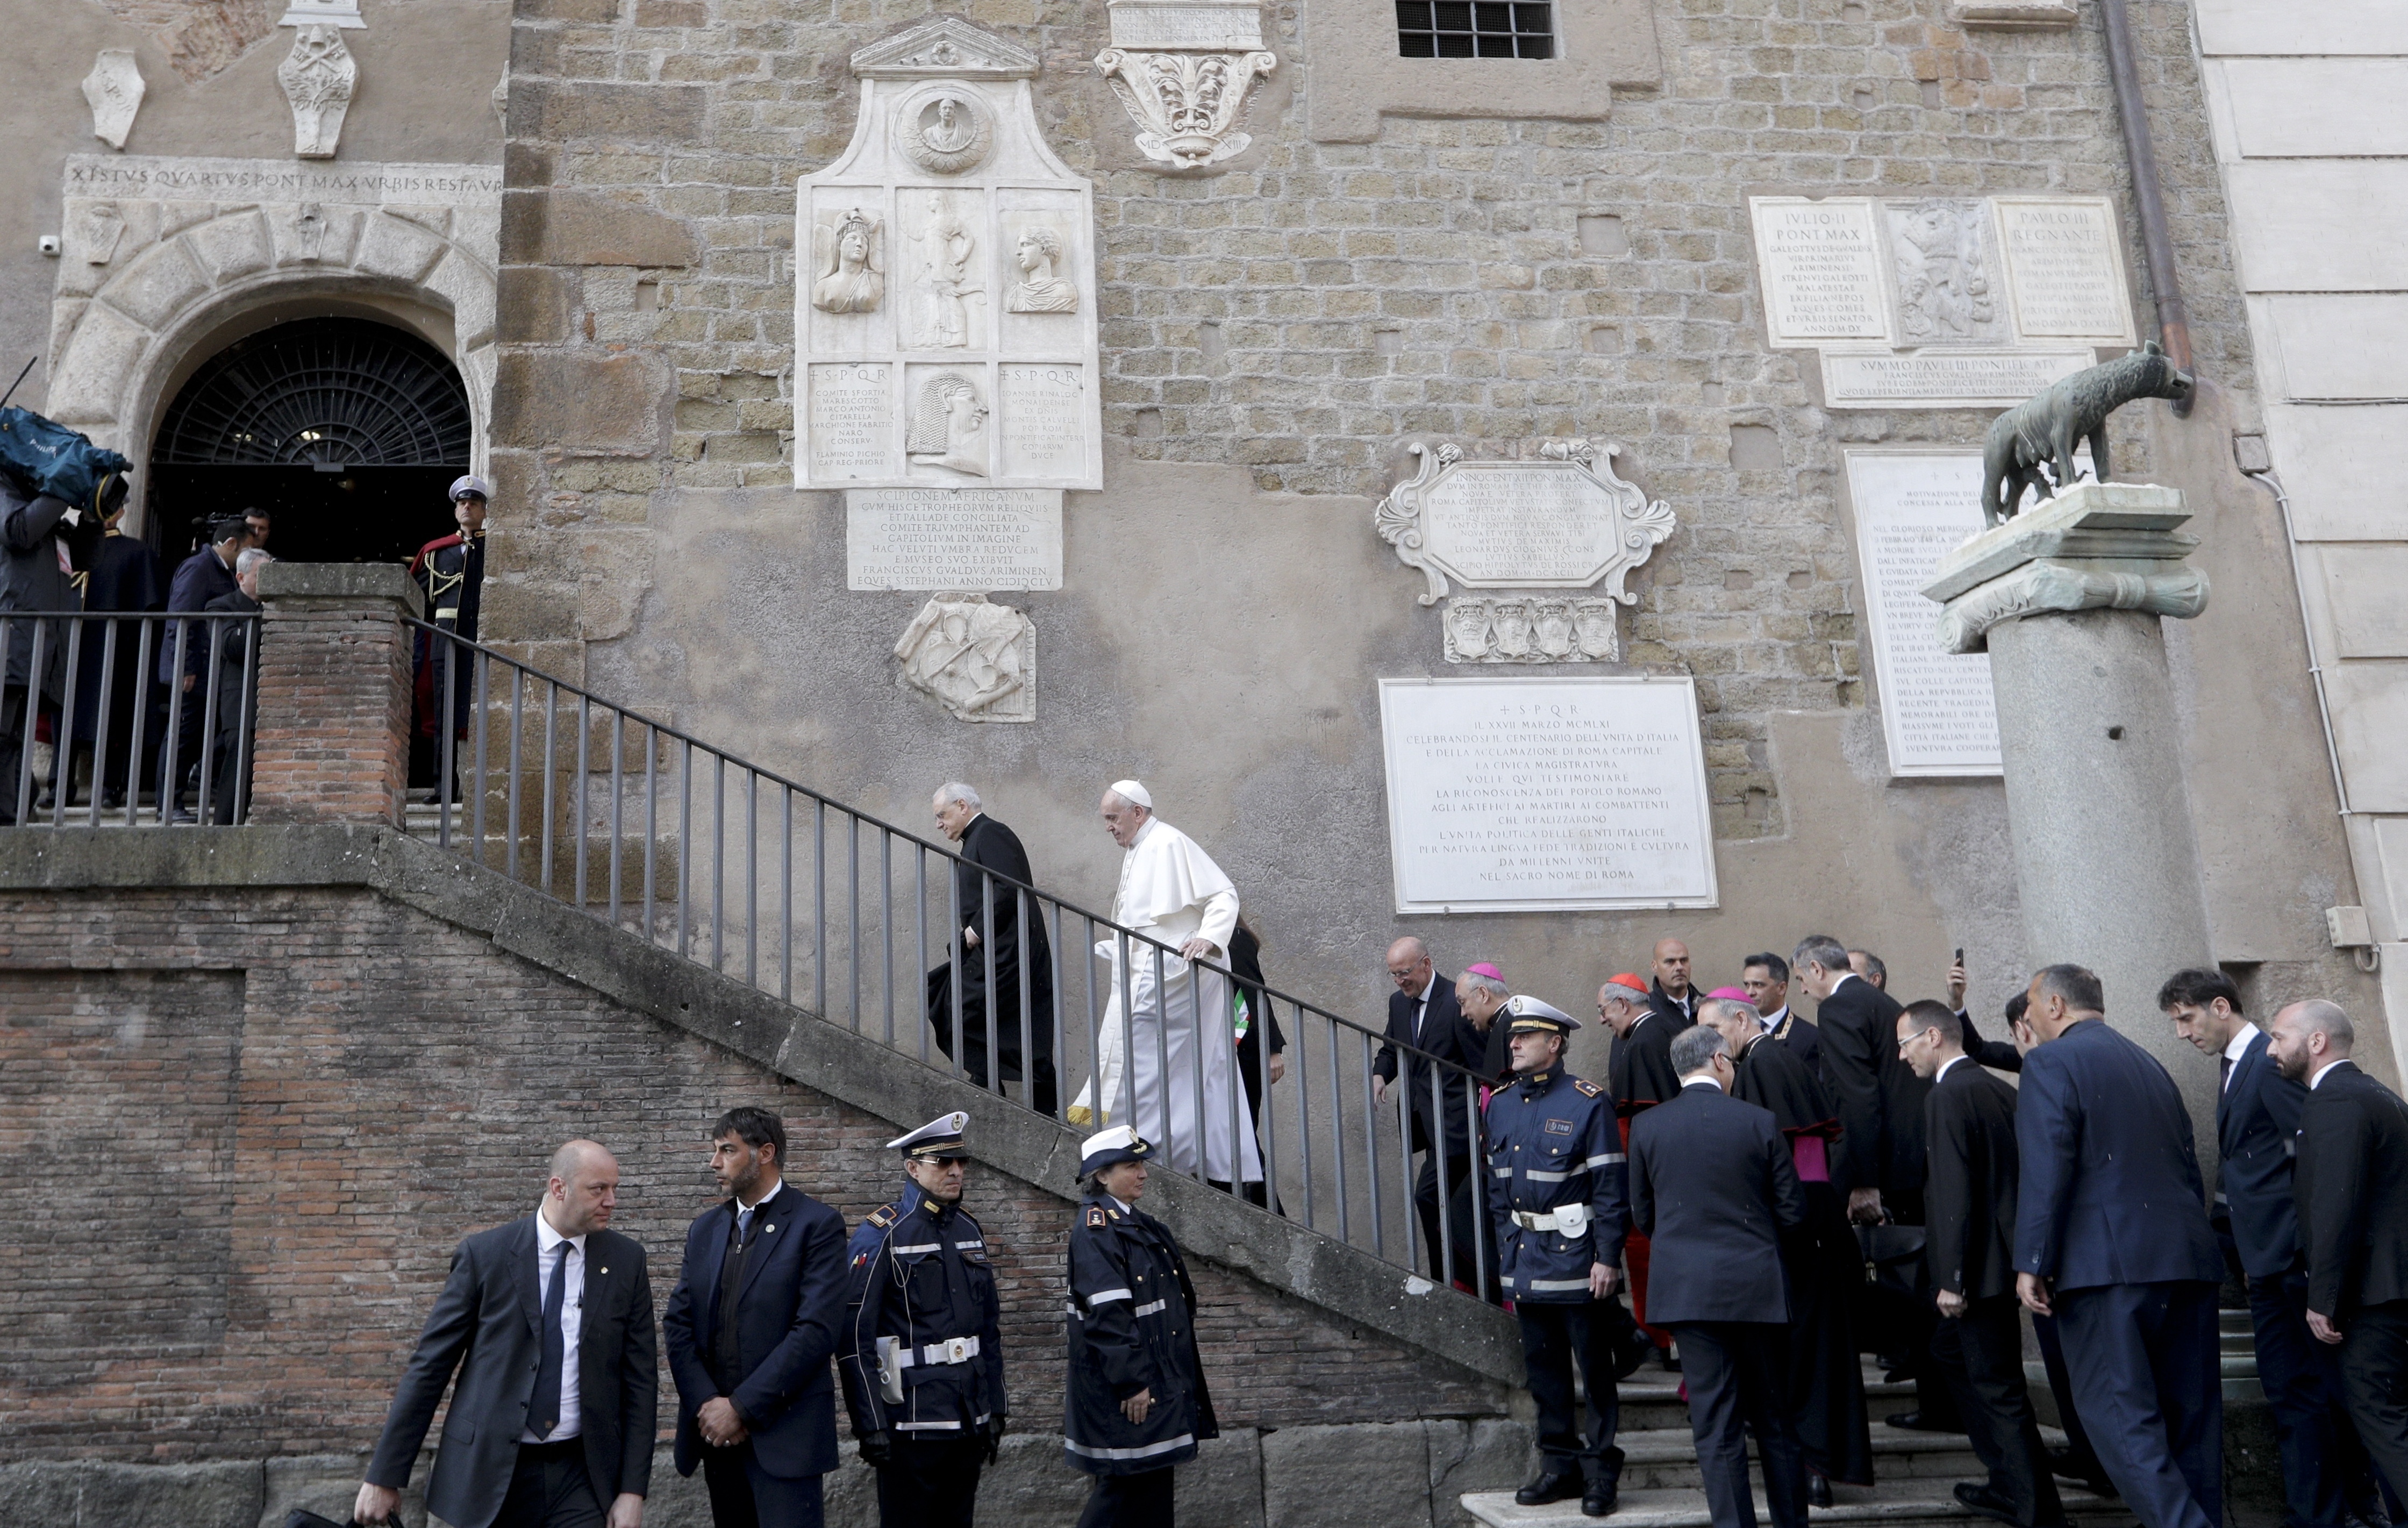 Pope Francis climbs the stairs leading to Rome Mayor's office as he arrives for his visit to the Rome's city hall, Tuesday, March 26, 2019. (AP Photo/Andrew Medichini)